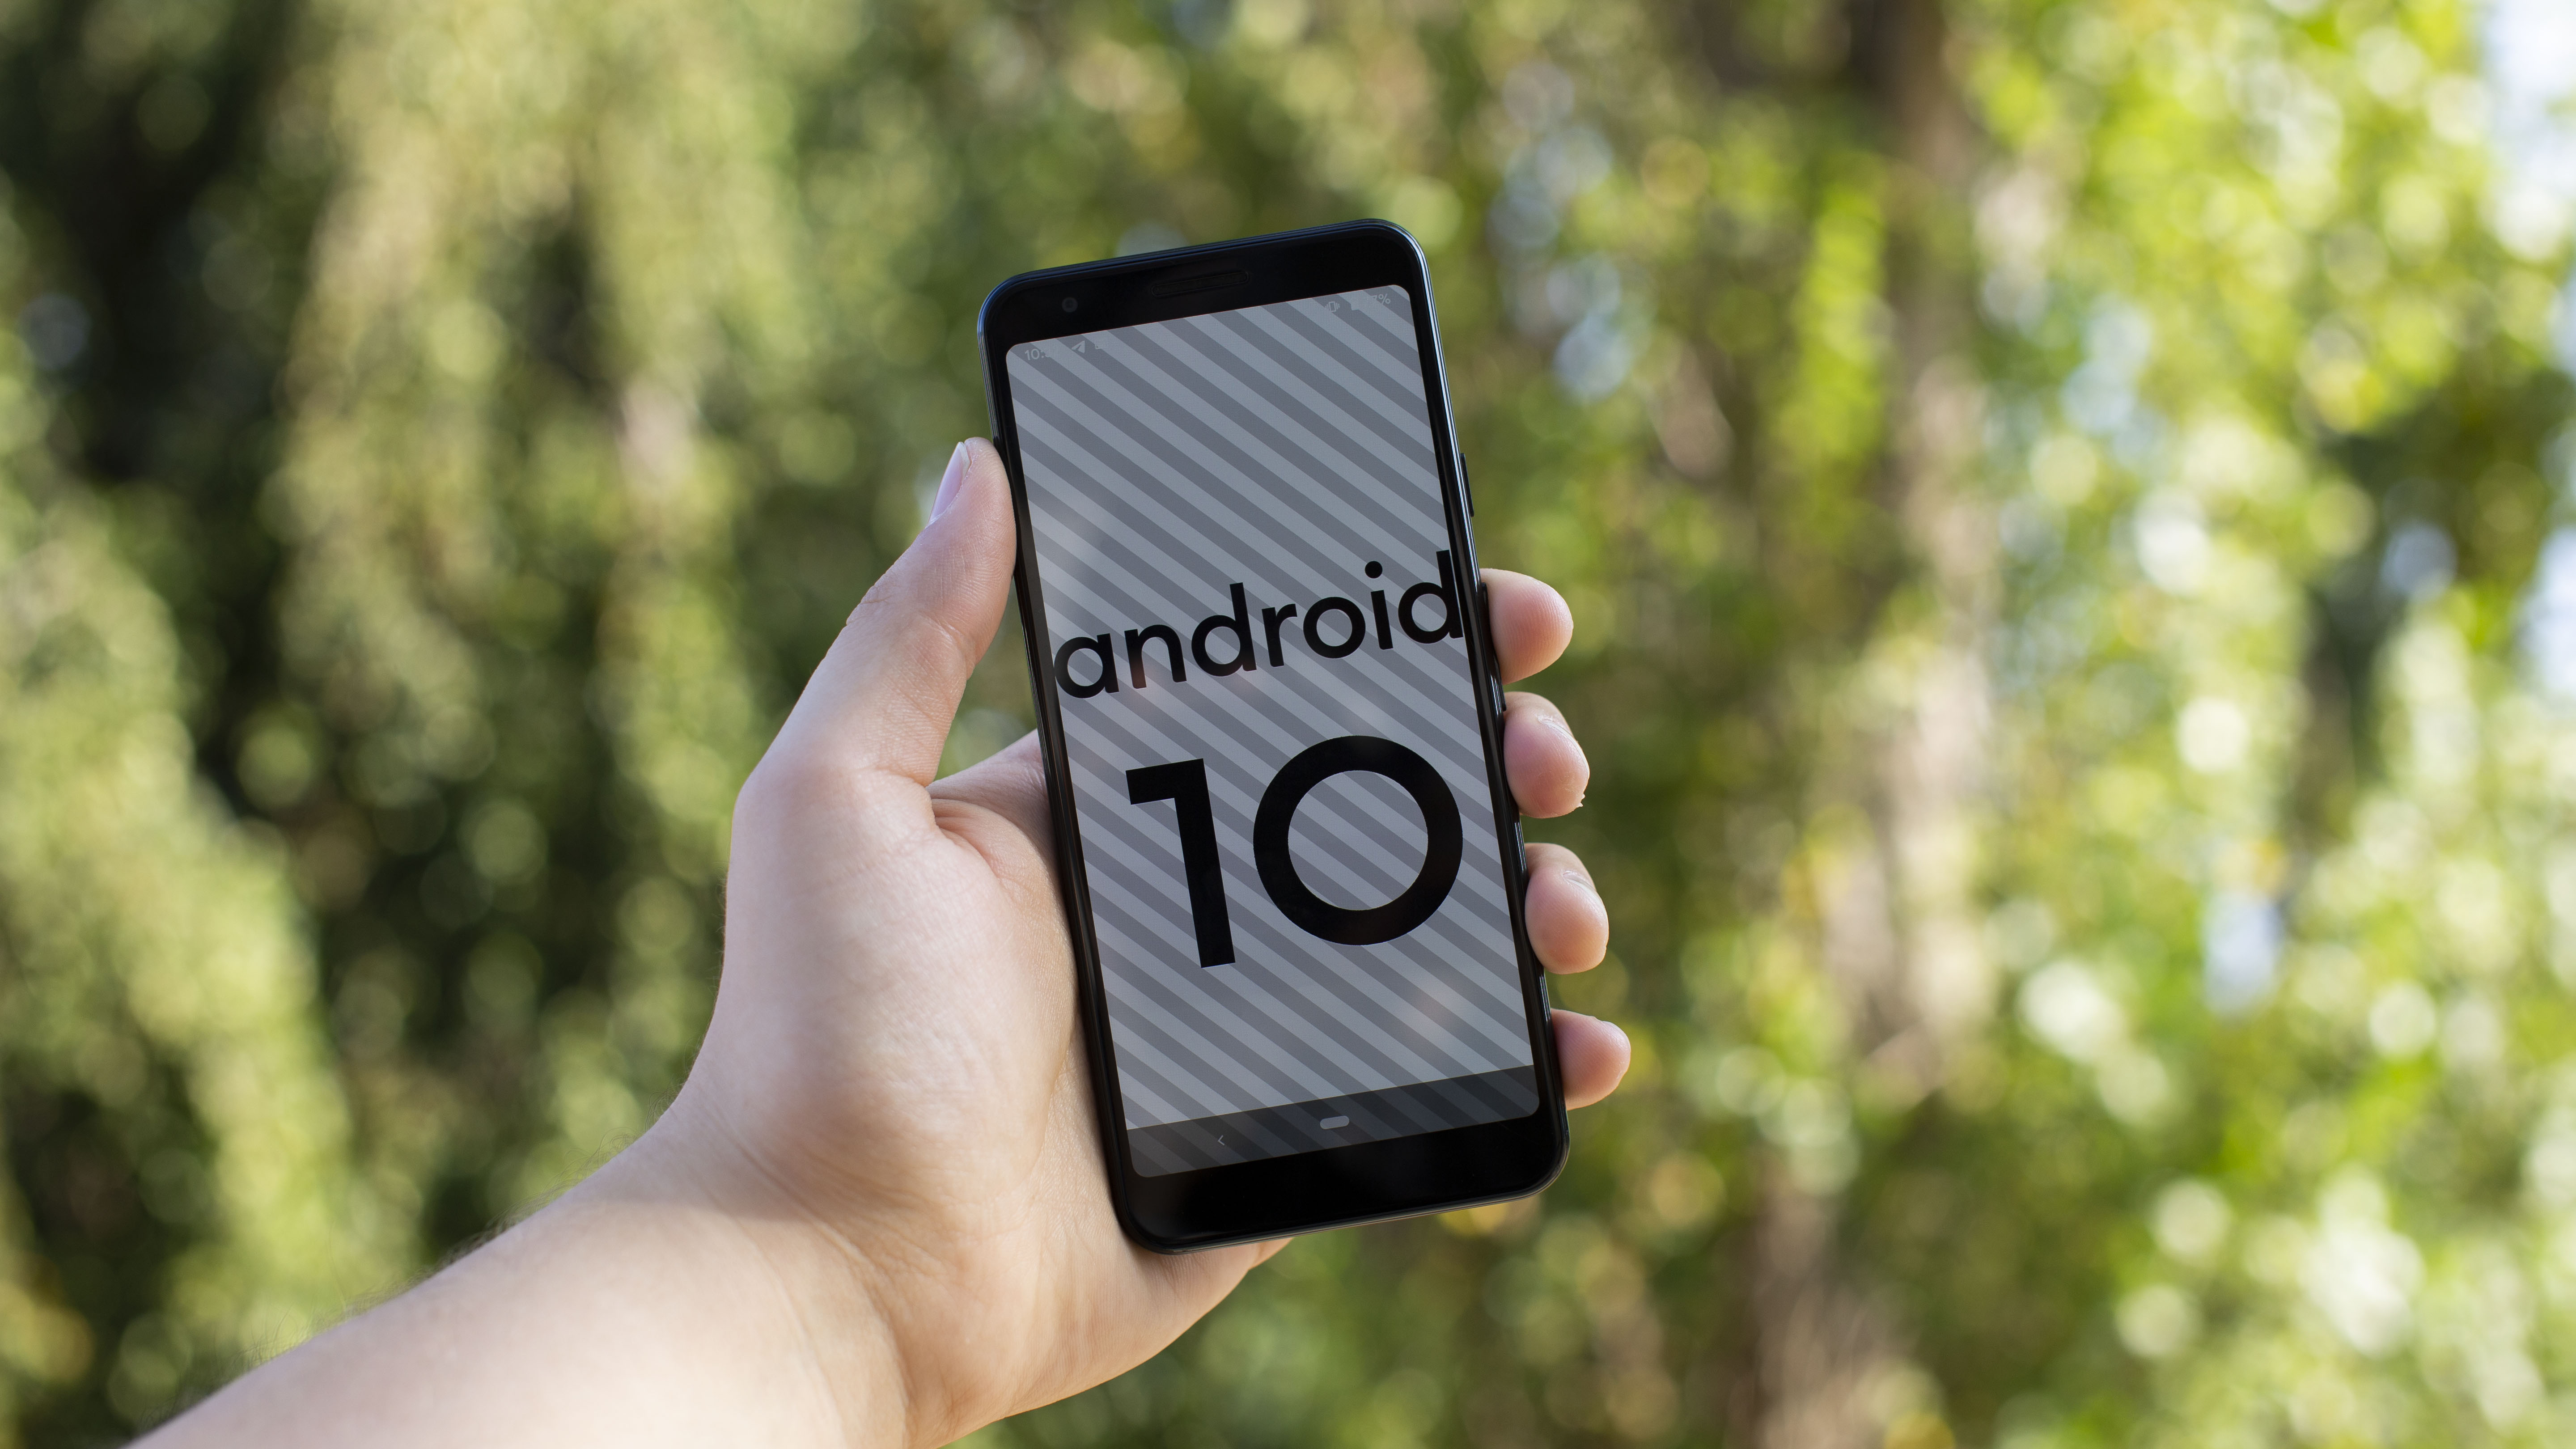 Android 10 Tips & Tricks: the 7 best new features you didn't know about